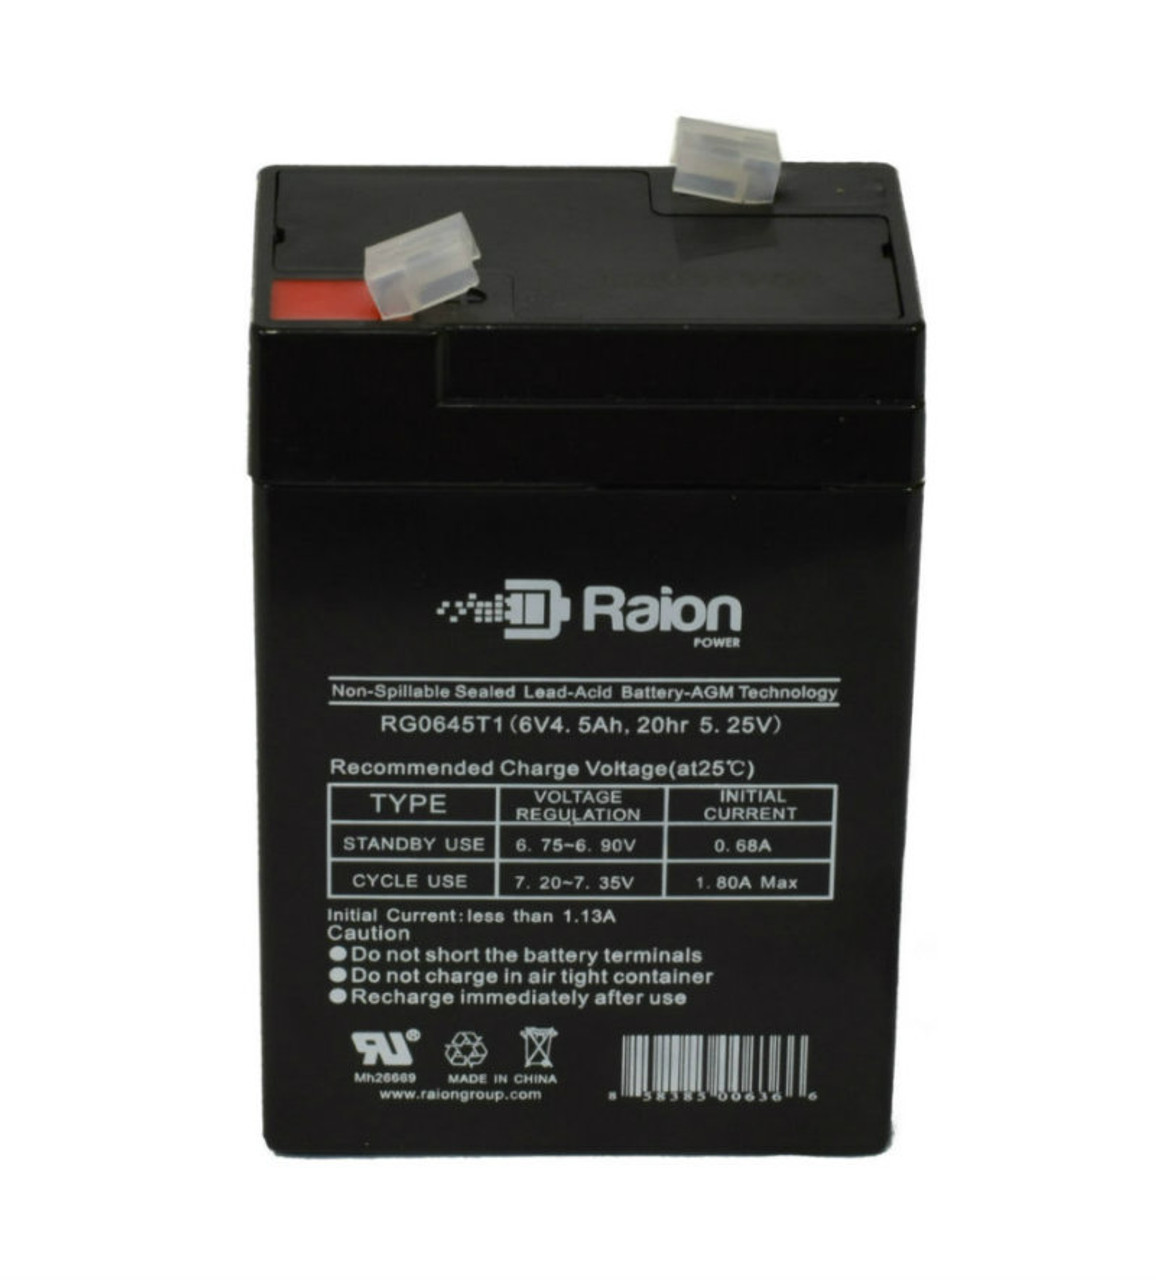 Raion Power RG0645T1 Replacement Battery Cartridge for Teledyne Big Beam S65